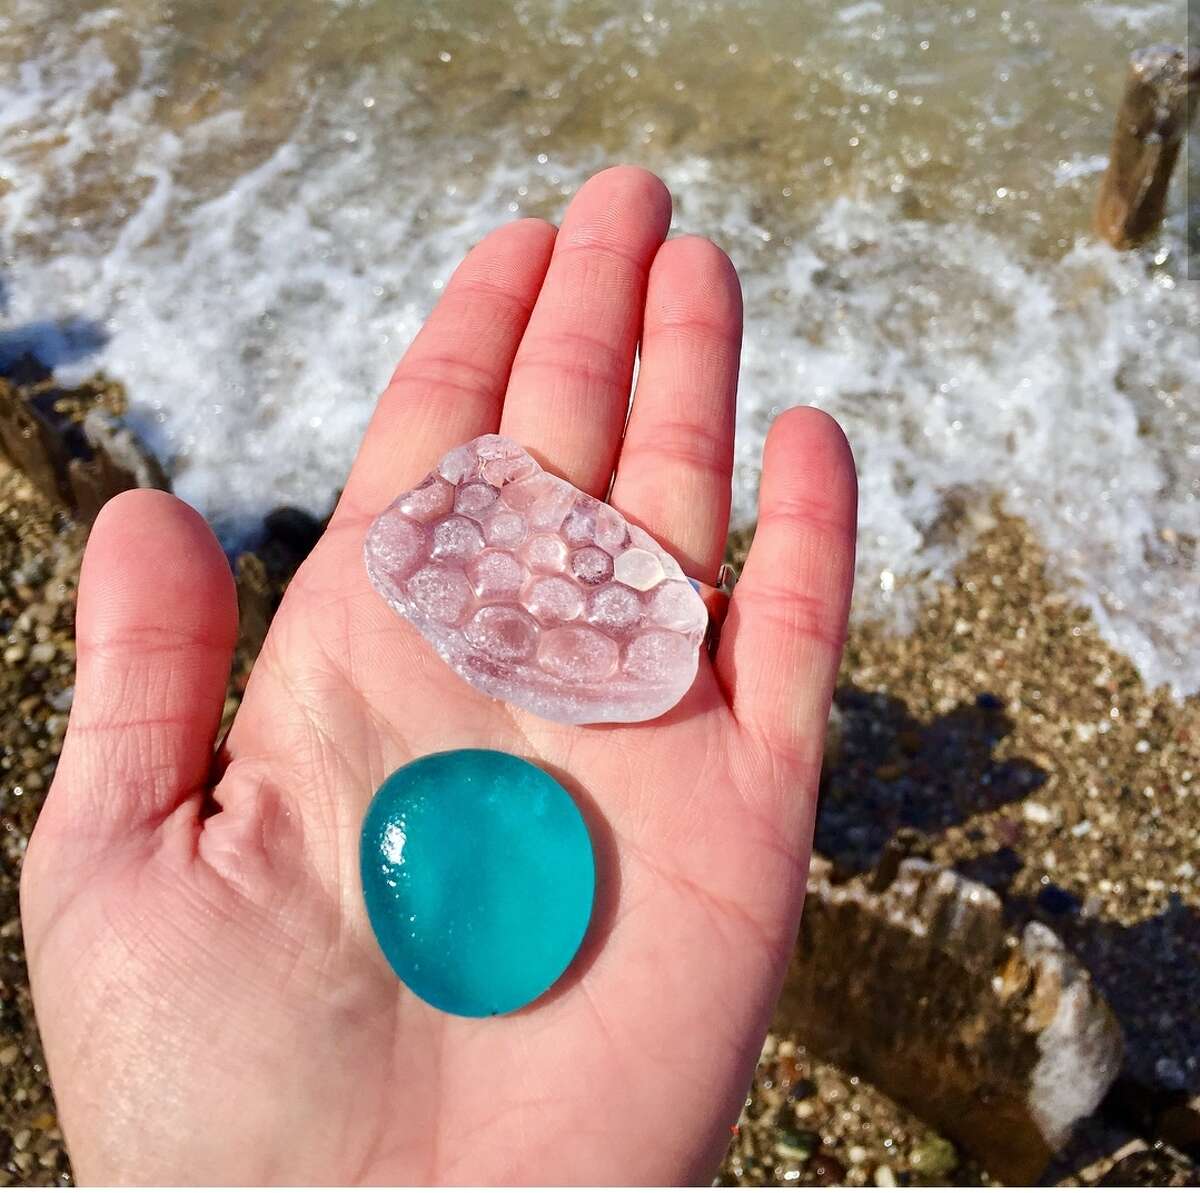 Erin LaMont of Bear Lake shared her photos of beach glass, rocks and other treasures she finds in her beachcombing trips. LaMont said she often searches beaches in Manistee County and outside the area seeking treasures.